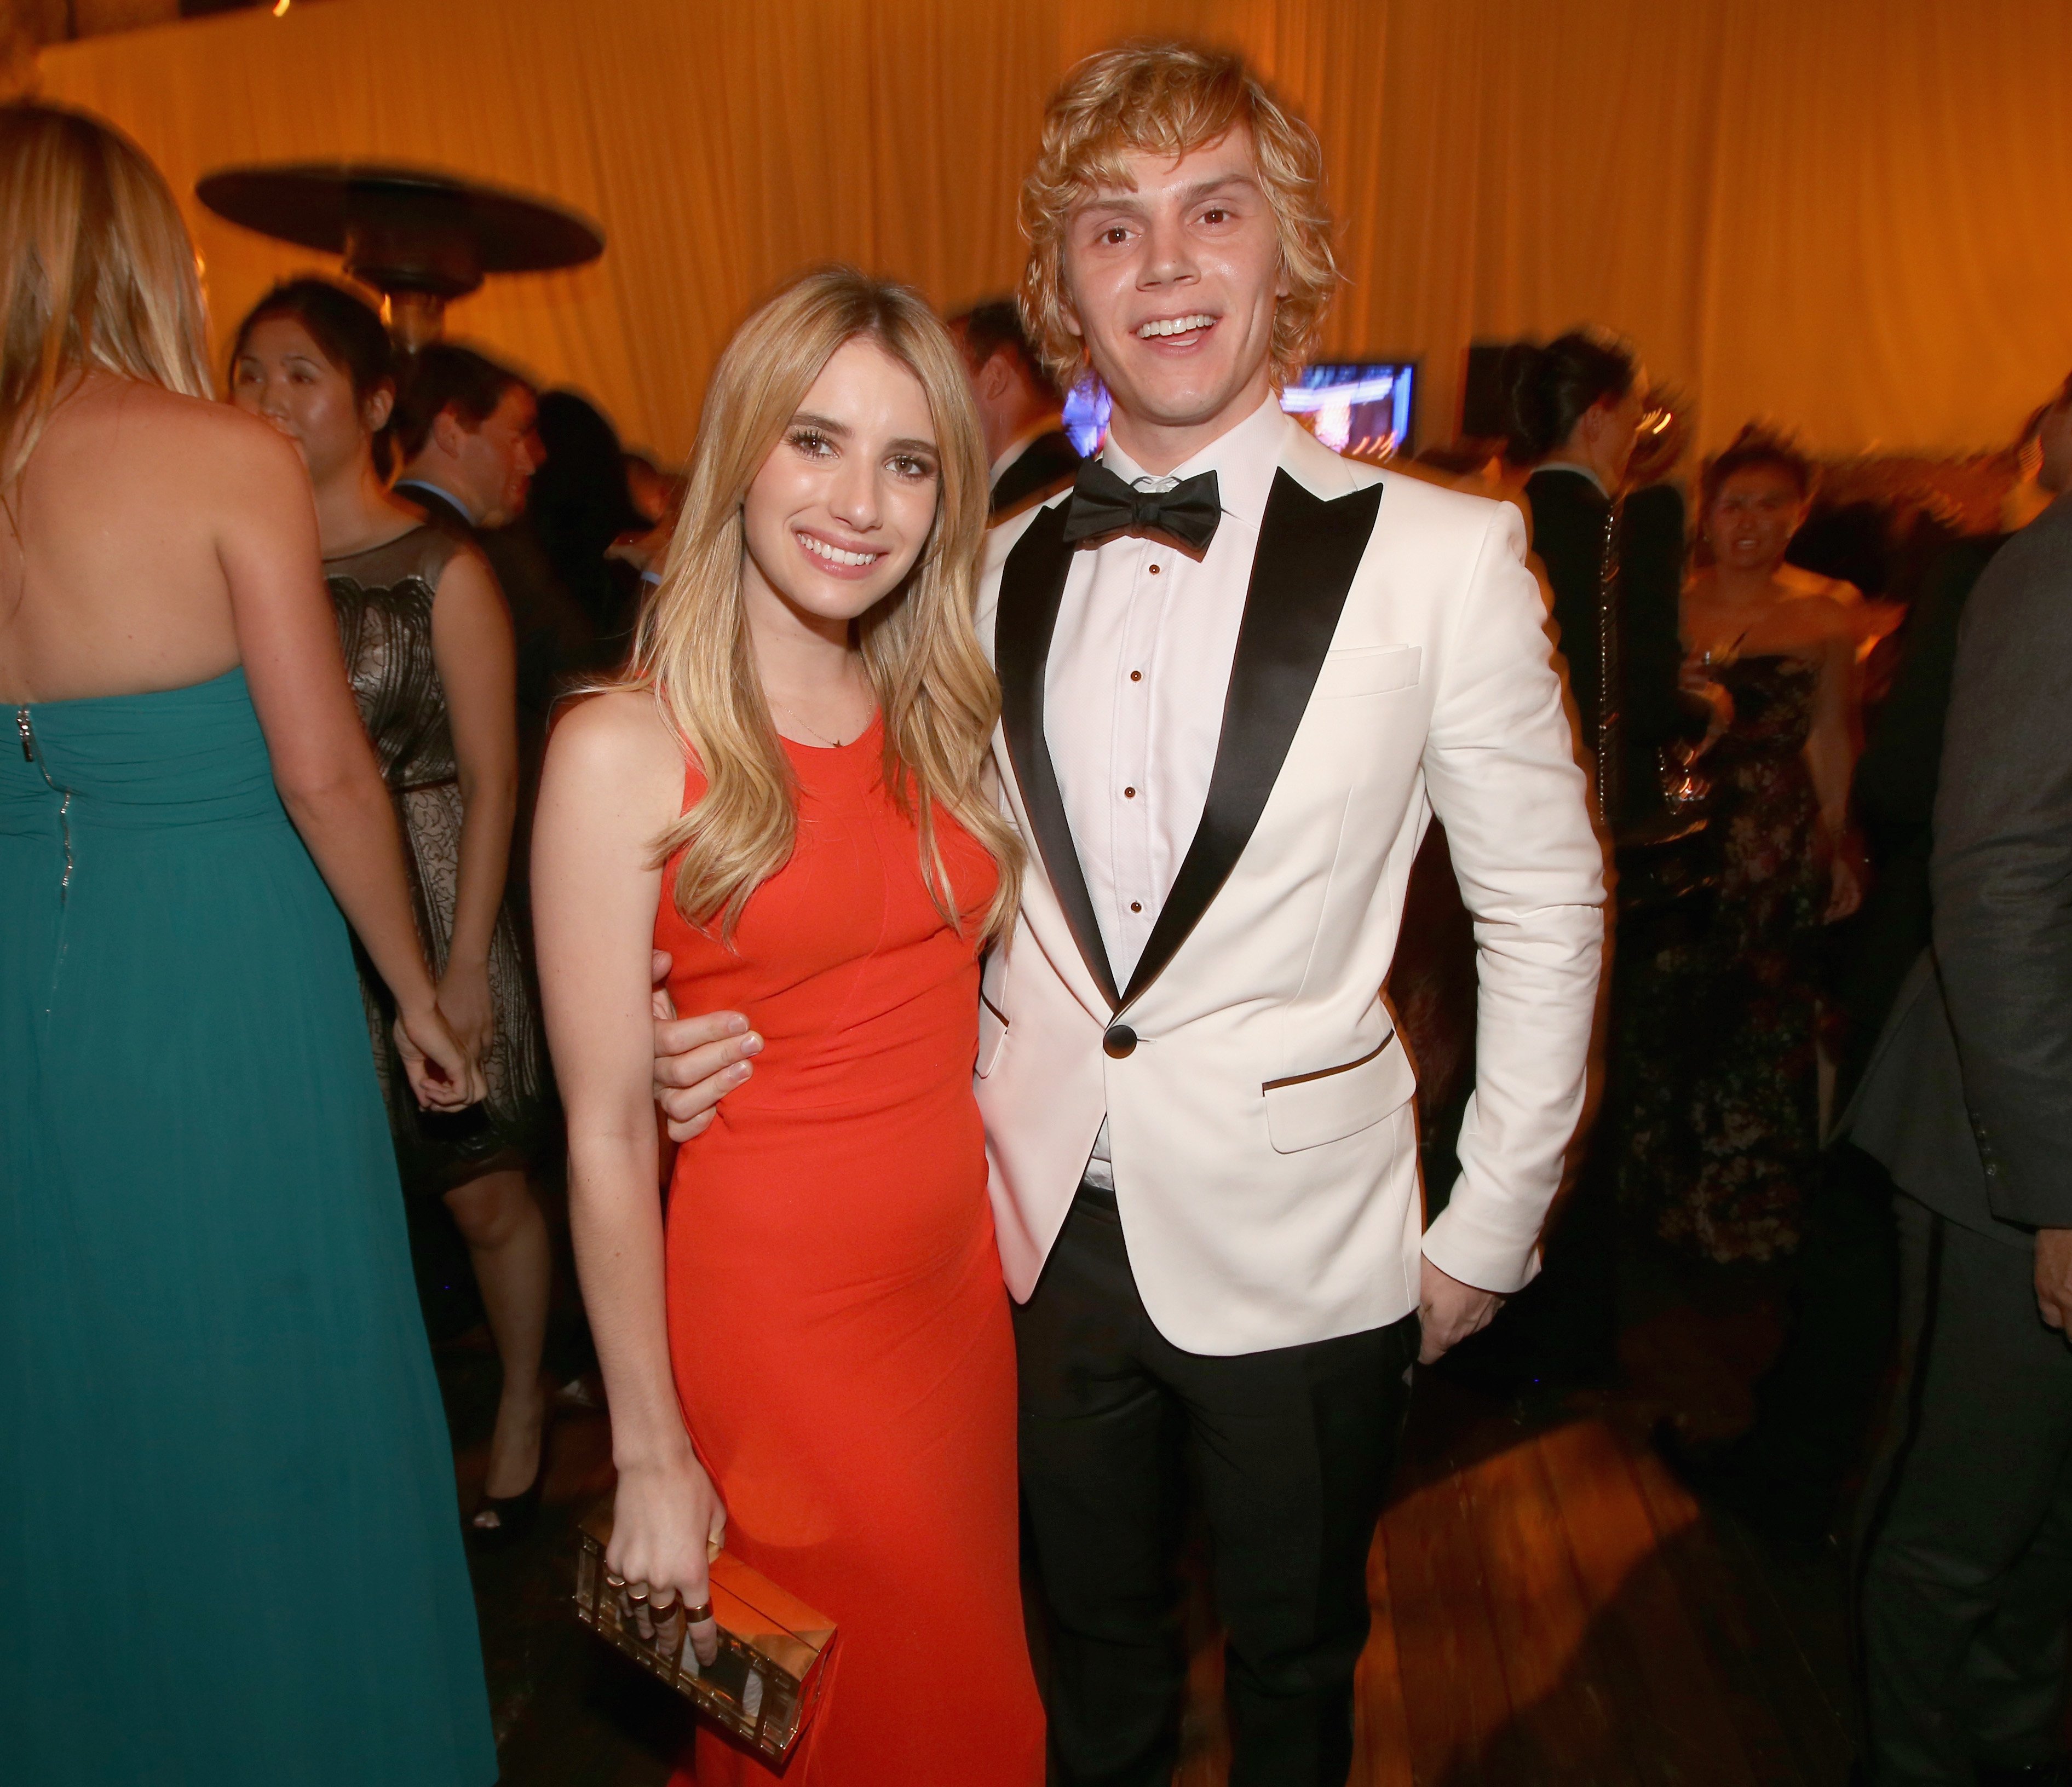 Emma Roberts and Evan Peters attend the Fox Broadcasting Company, Twentieth Century Fox Television and FX celebration of their 2013 EMMY nominees on September 22, 2013 in Los Angeles, California. | Source: Getty Images